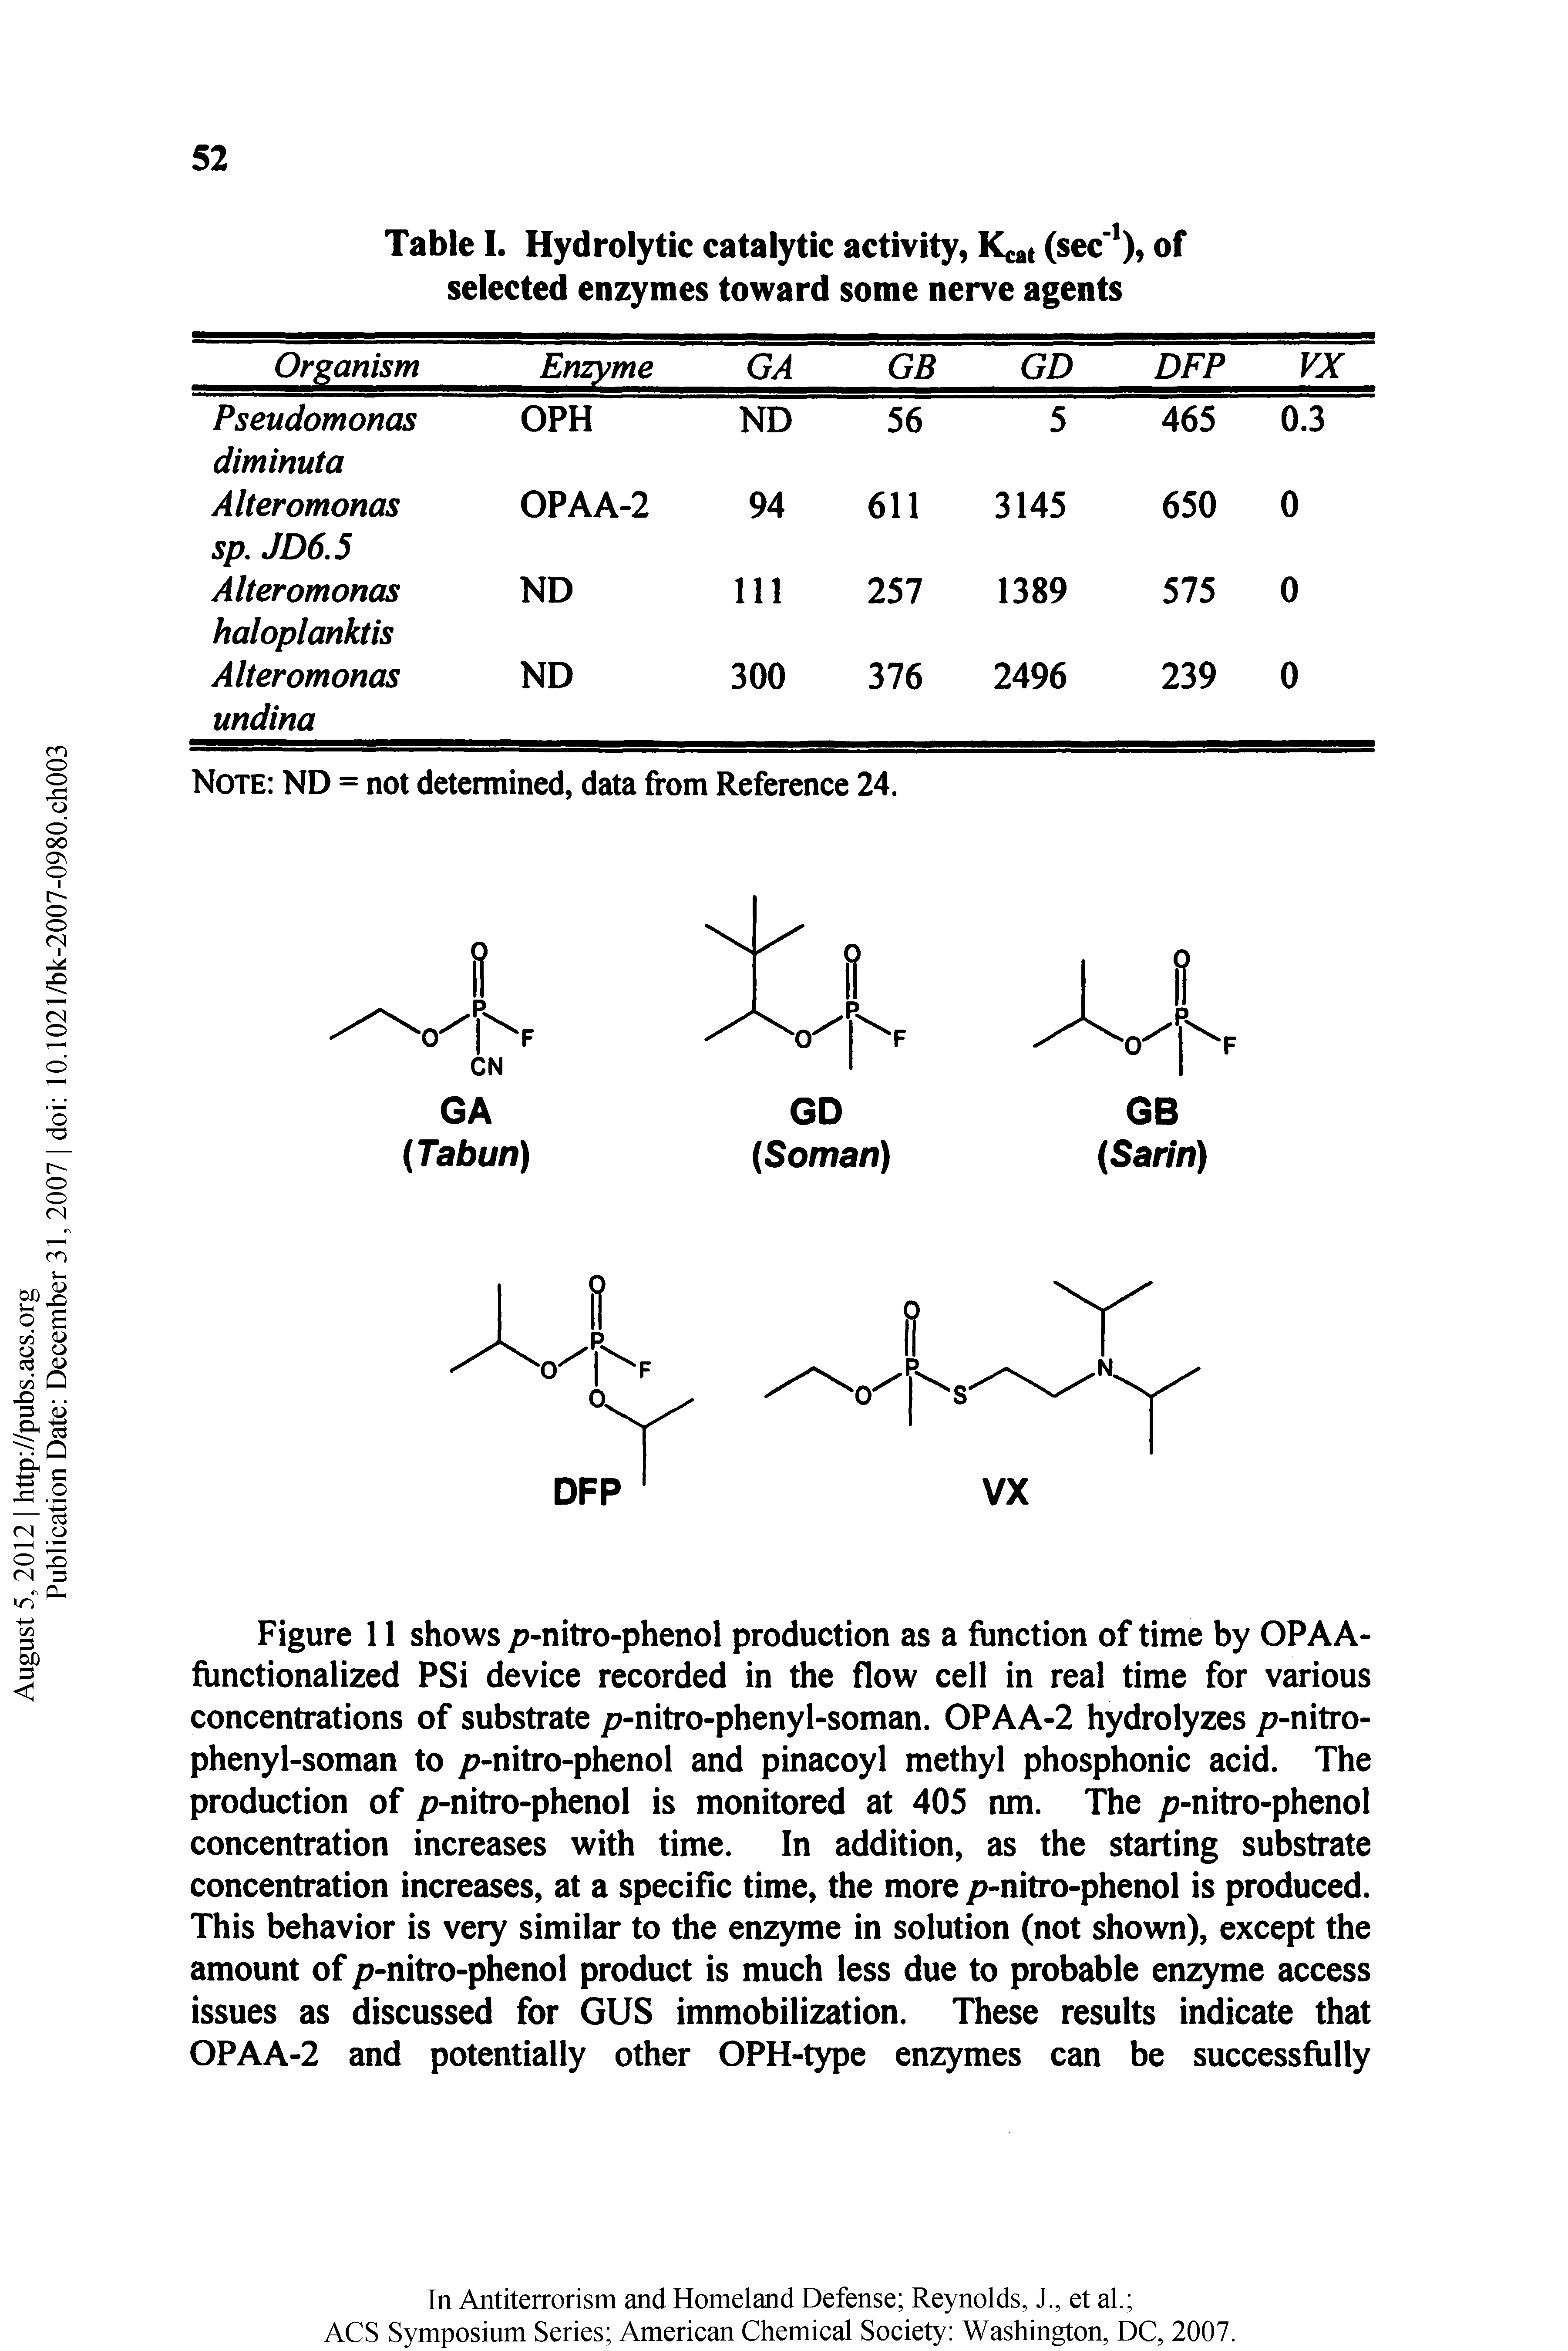 Table I. Hydrolytic catalytic activity, Kd (sec ), of selected enzymes toward some nerve agents...